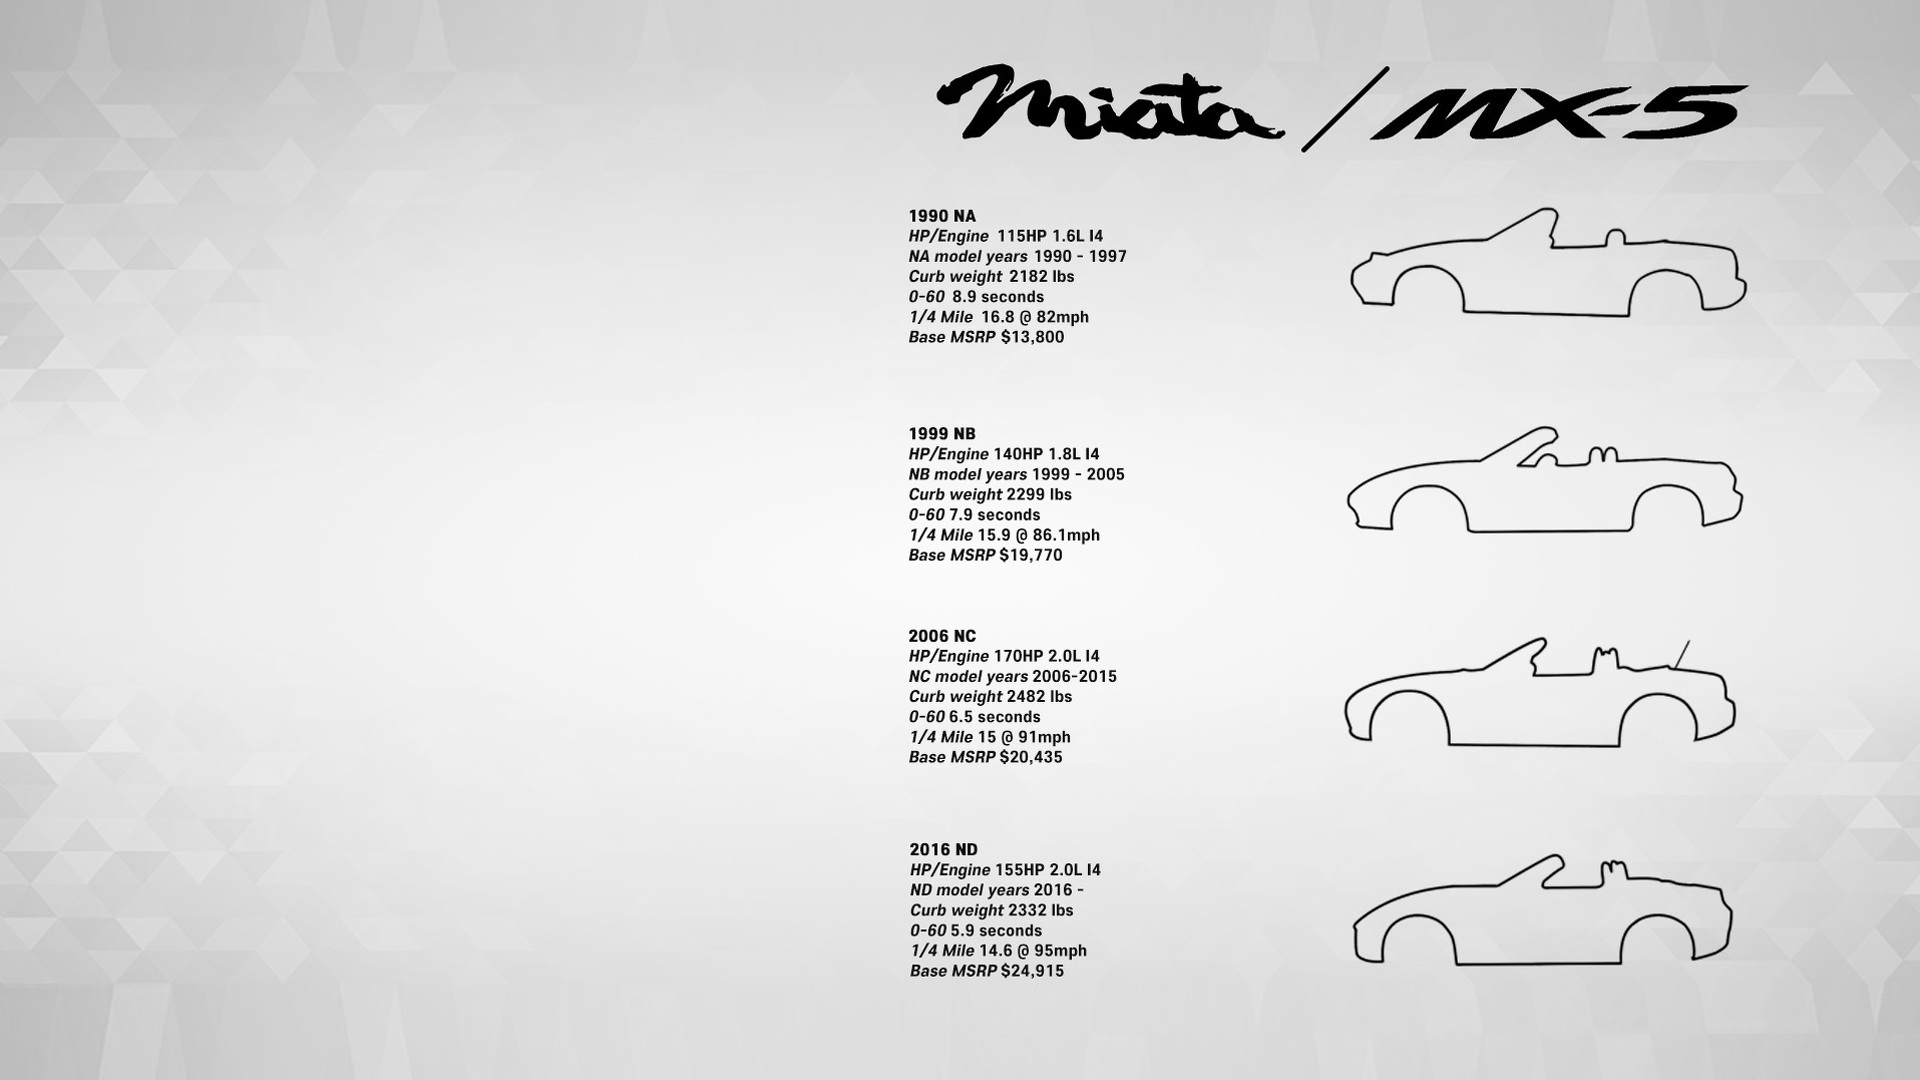 This Mazda Mx Miata Generations Poster Or Wallpaper For